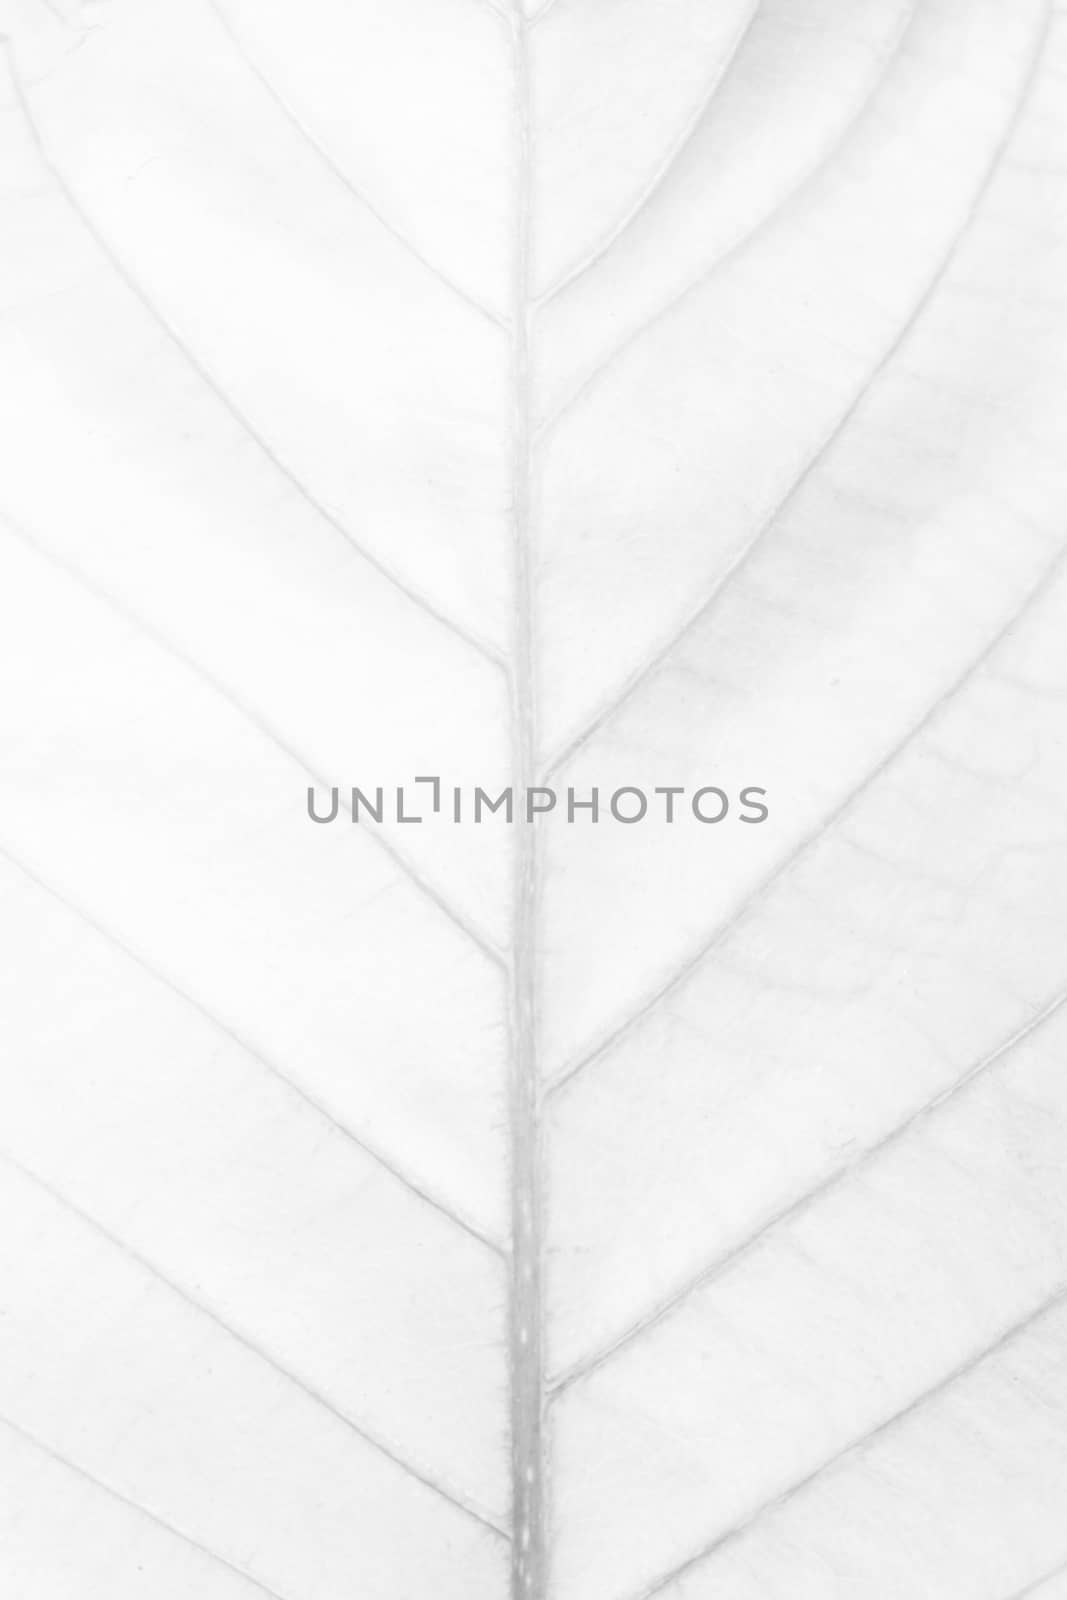 White leaf Texture Background. by mesamong